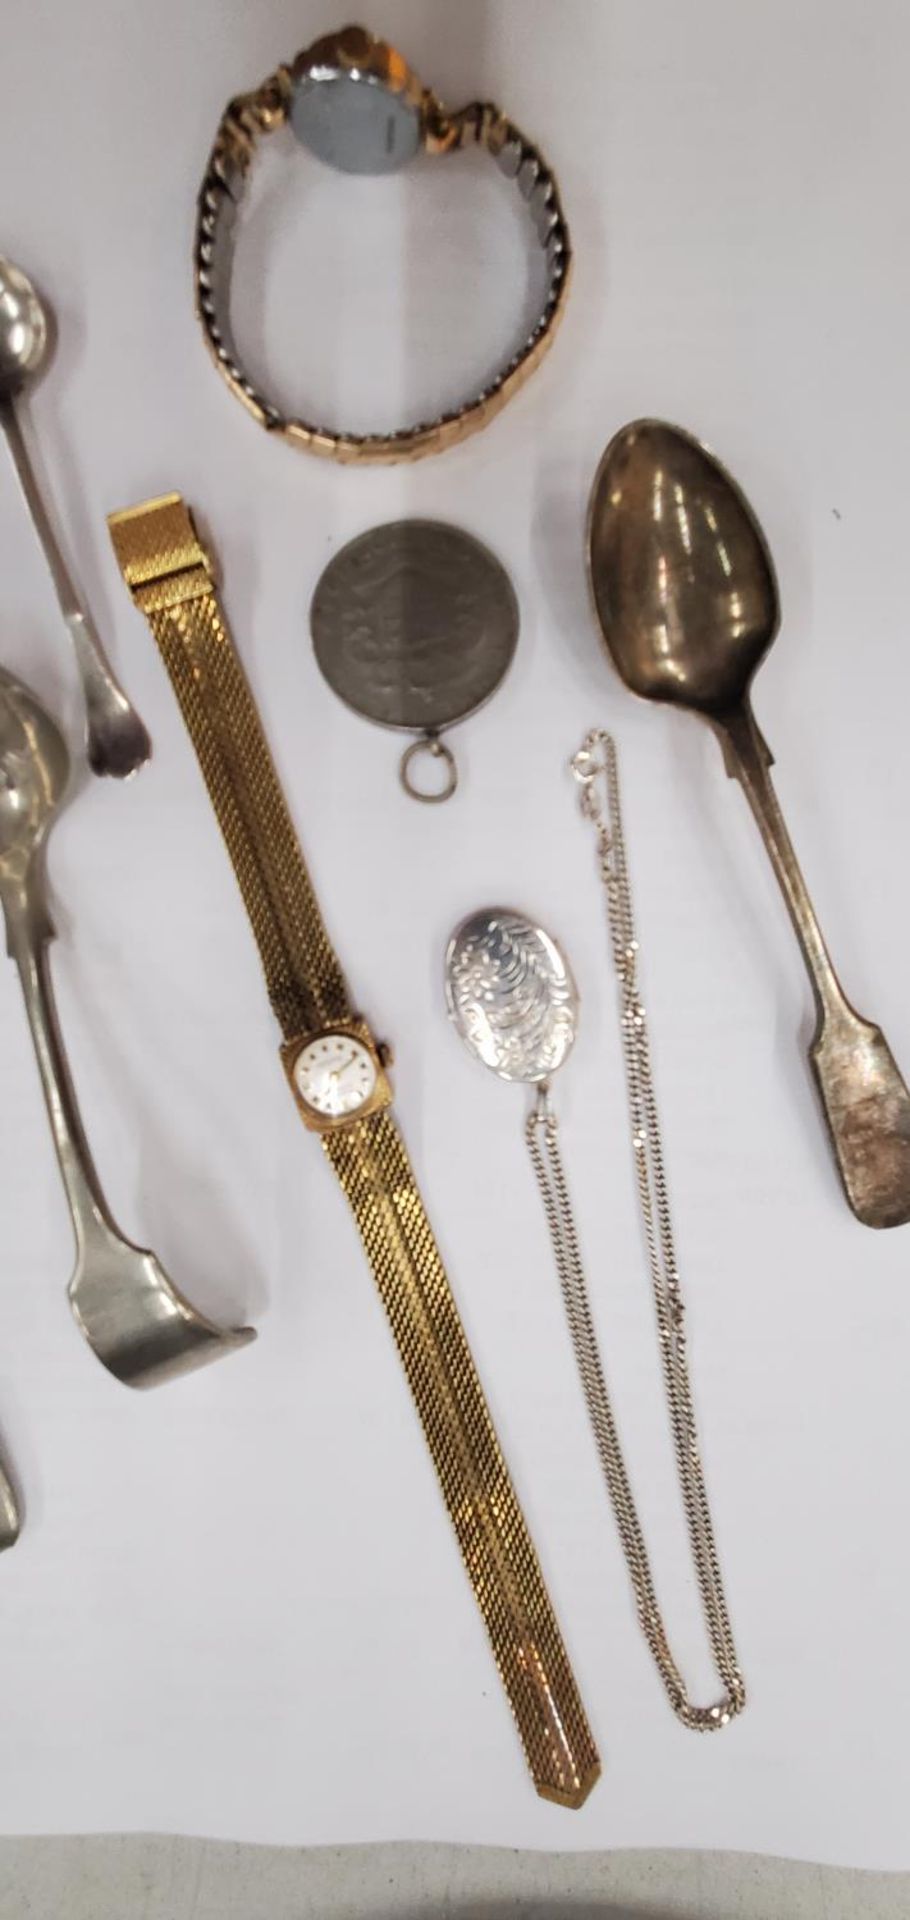 A SILVER LOCKET AND CHAIN, TWO VINTAGE LADIES WRISTWATCHES, FLATWARE, A KING GEORGE VI CORONATION - Image 3 of 3